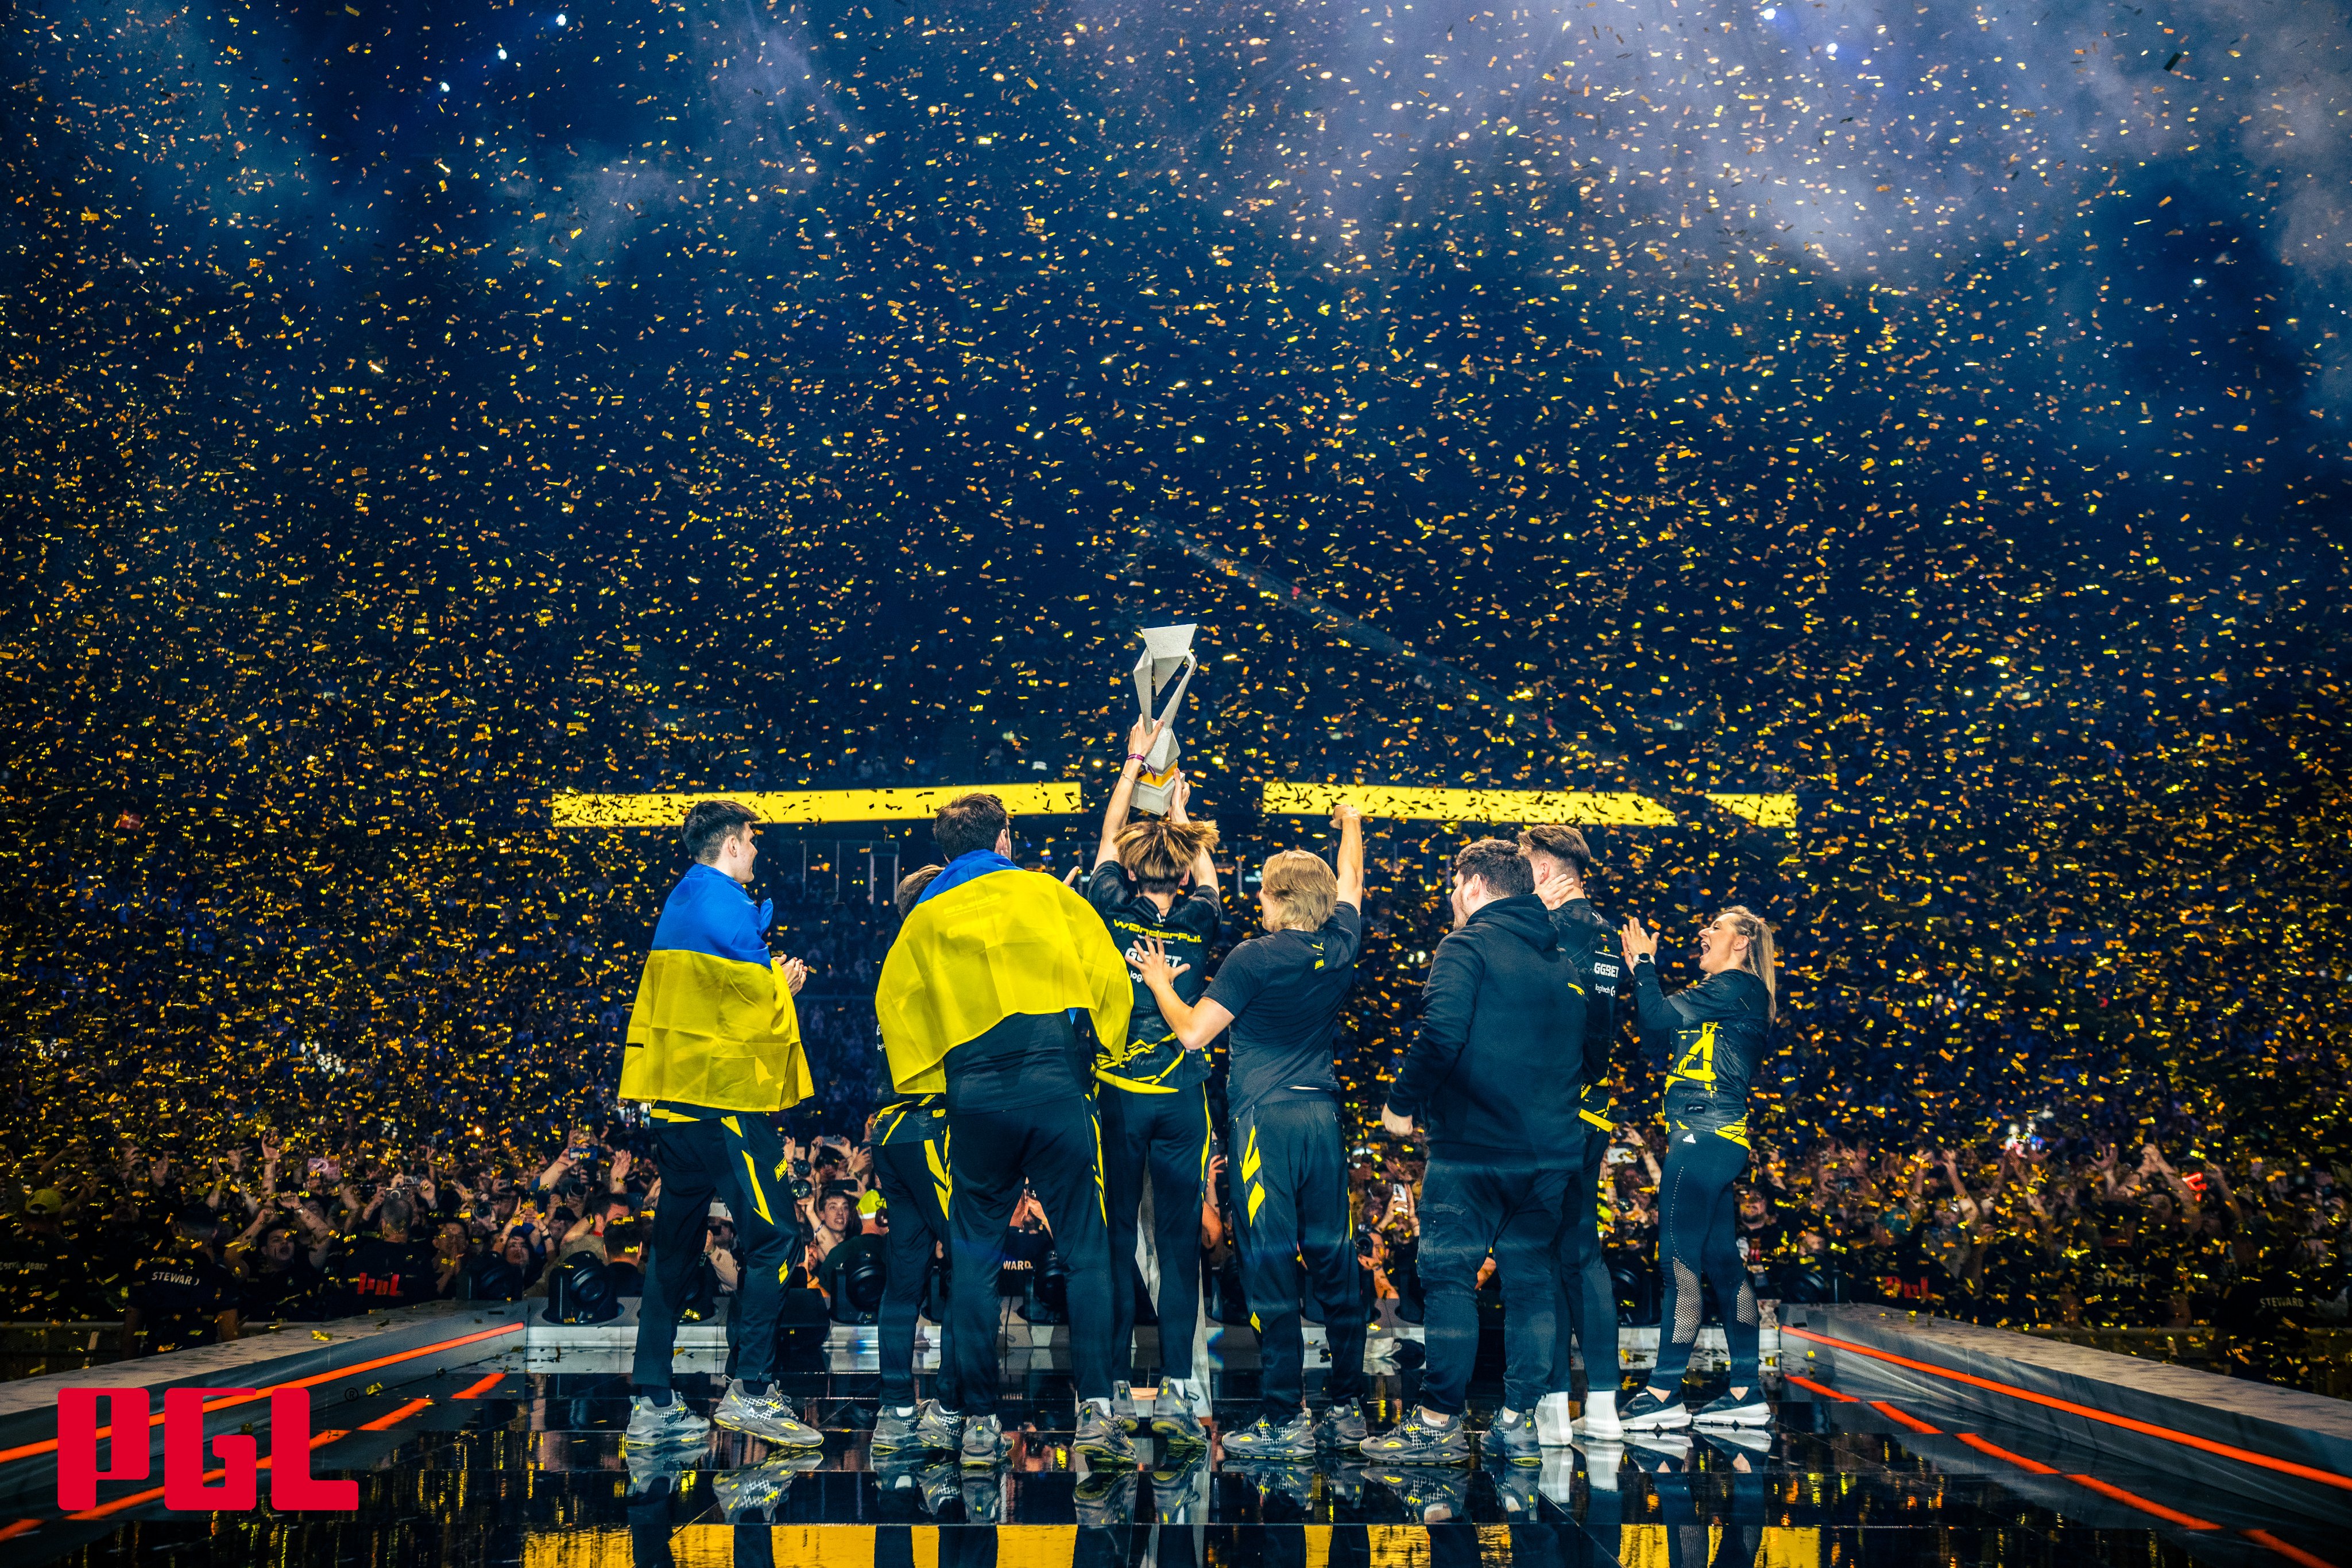 The Ukrainian team NaVi has become the first world champion in Counter-Strike 2